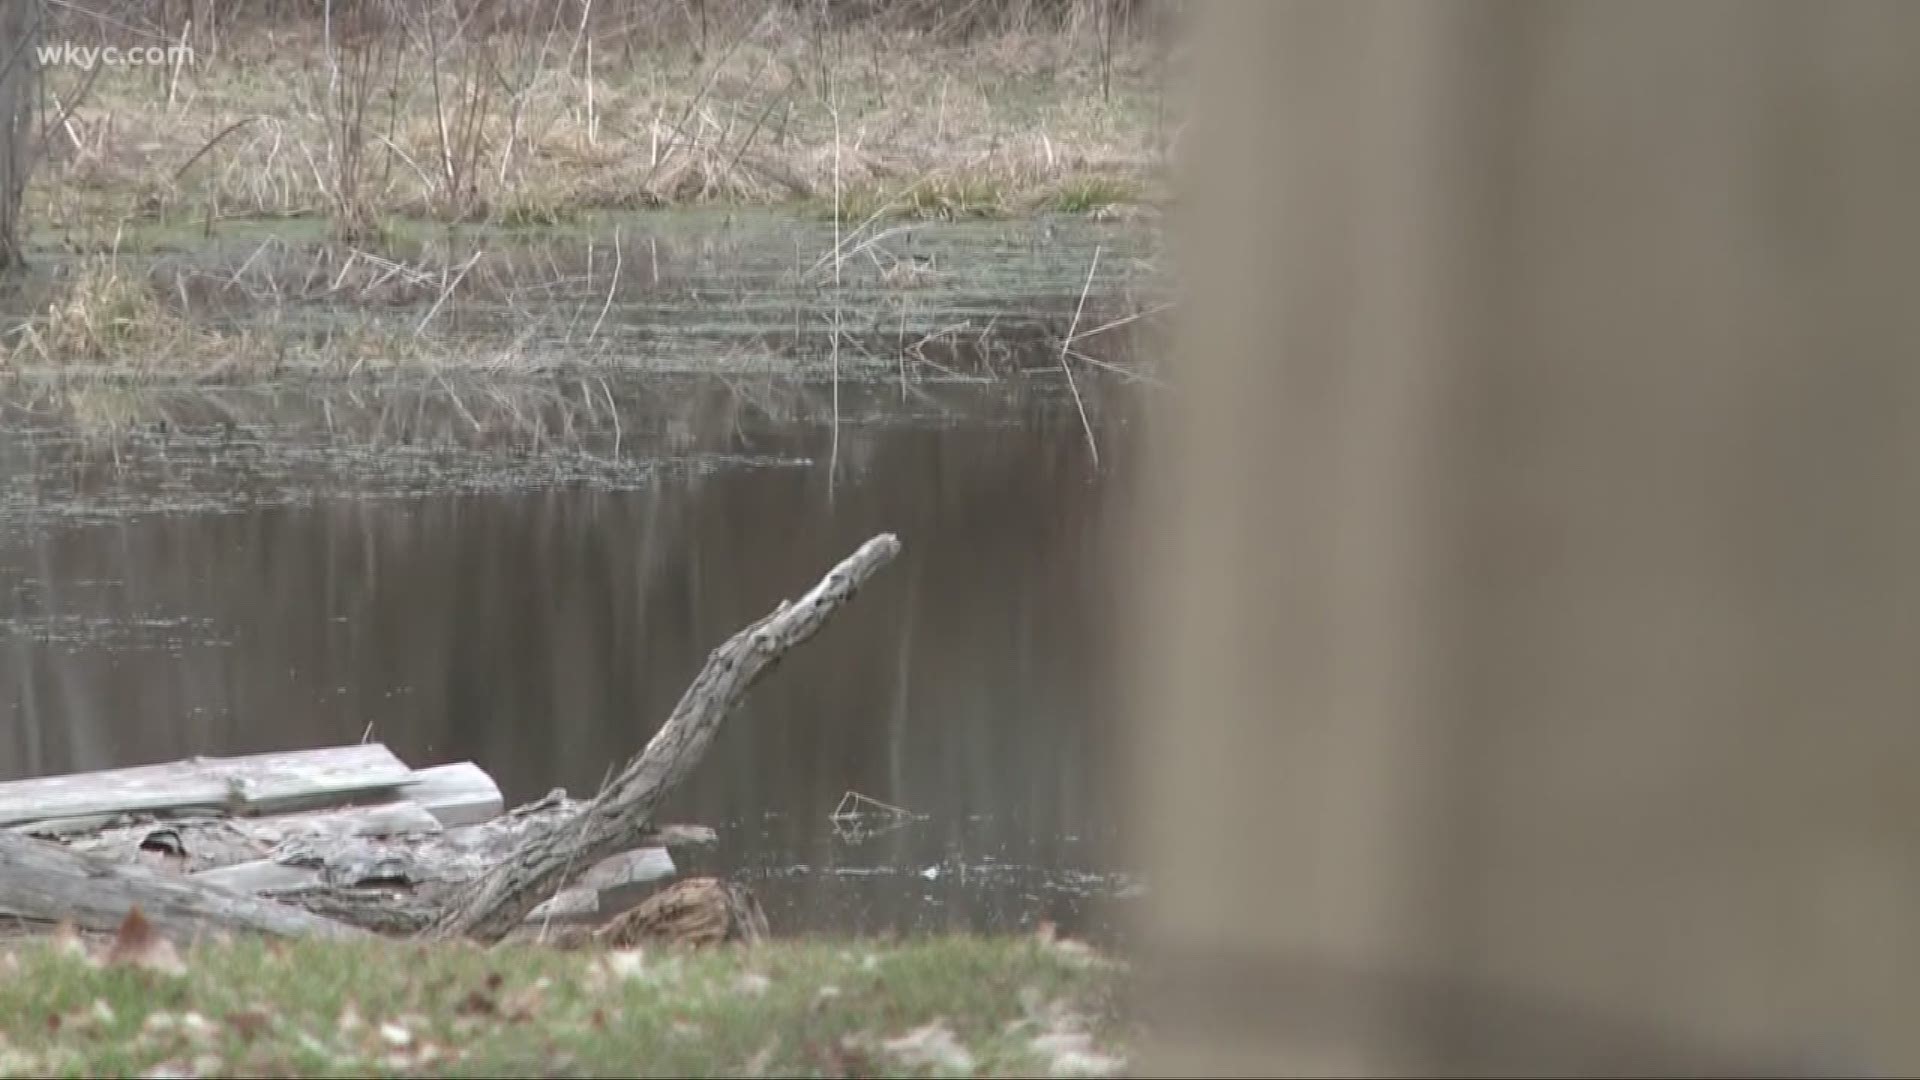 missing teen's body pulled from pond in Stark County